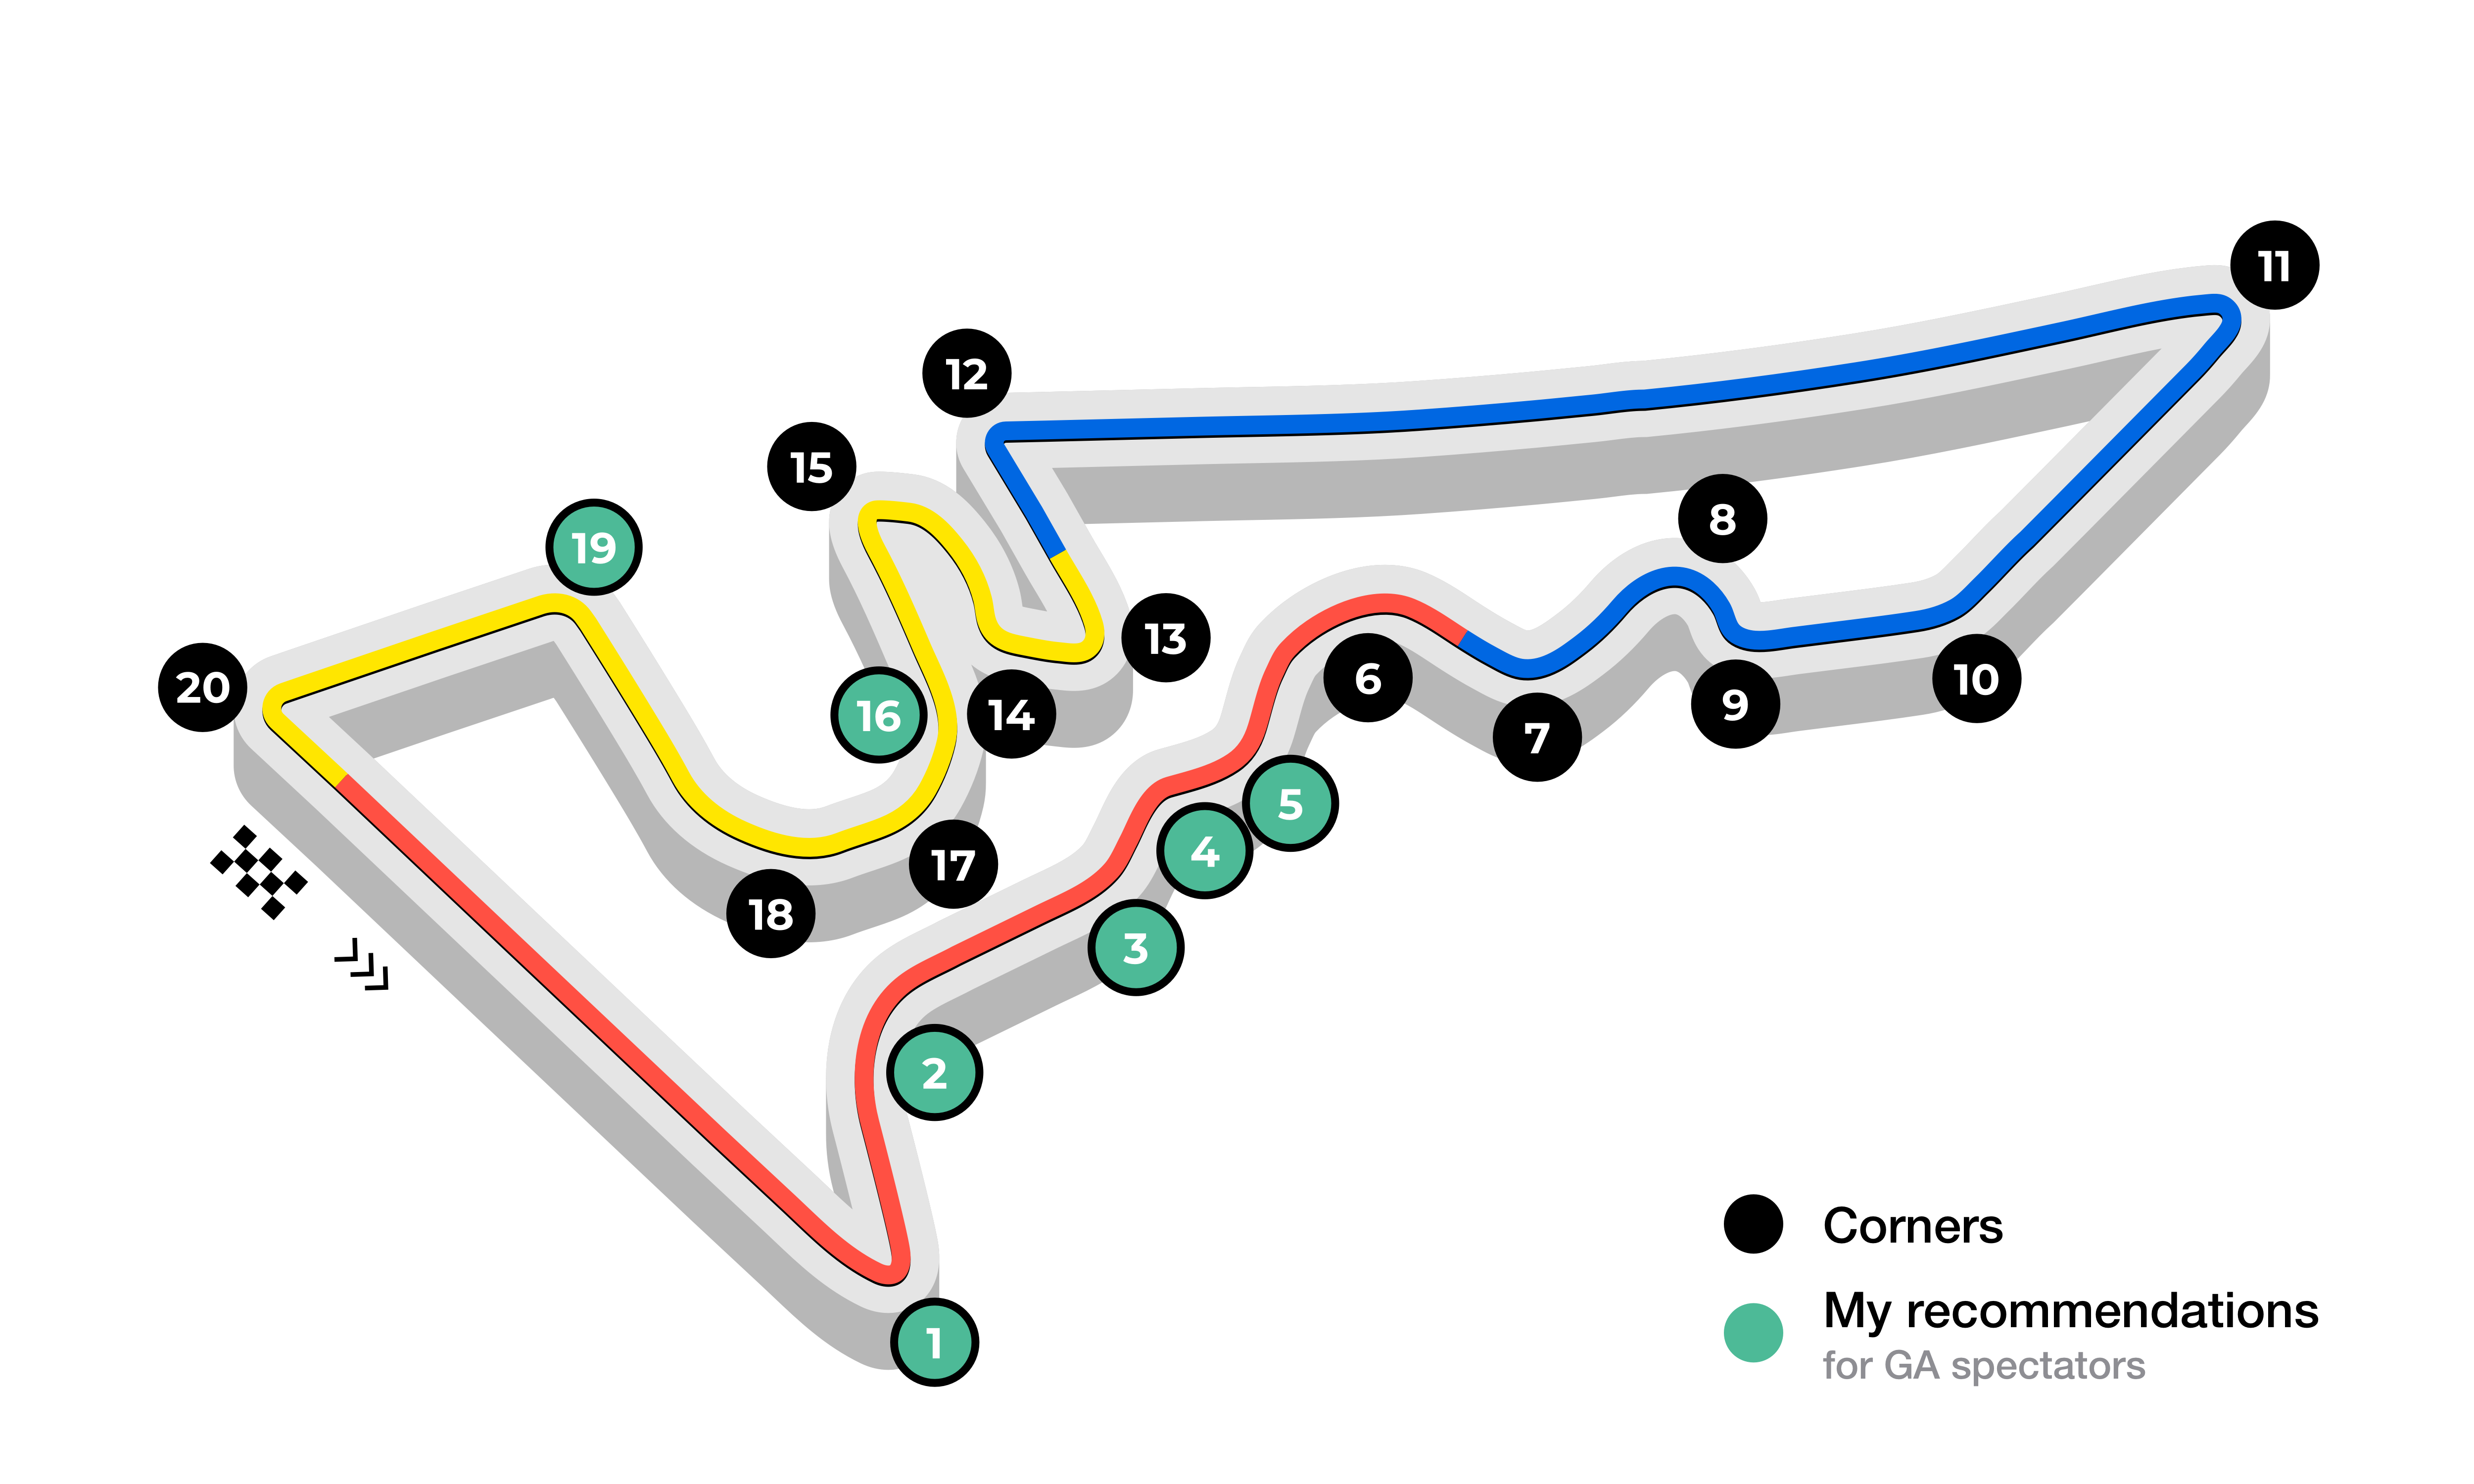 A map of COTA, highlighting Turns 1, 2, 3, 4, 5, 16 and 19 as ideal GA spectator spots